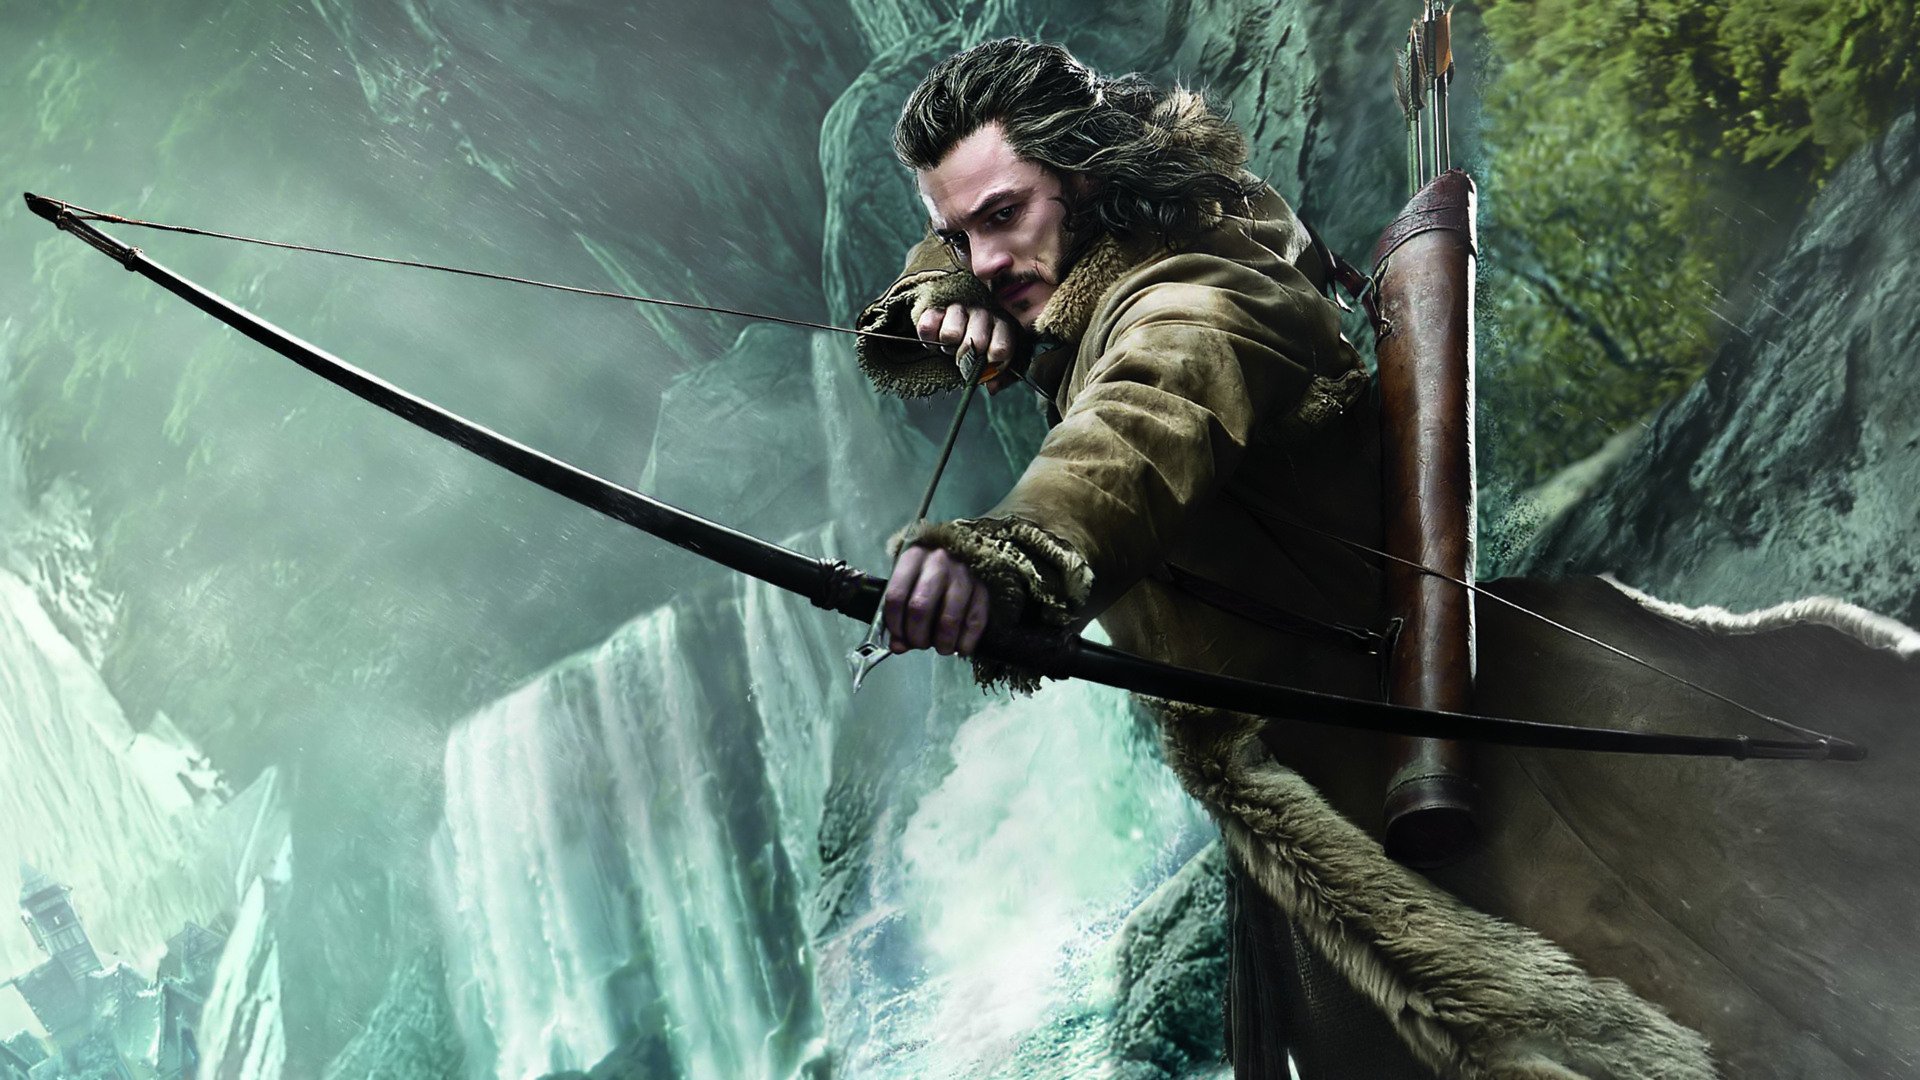 The Hobbit: The Desolation of Smaug download the new version for ios